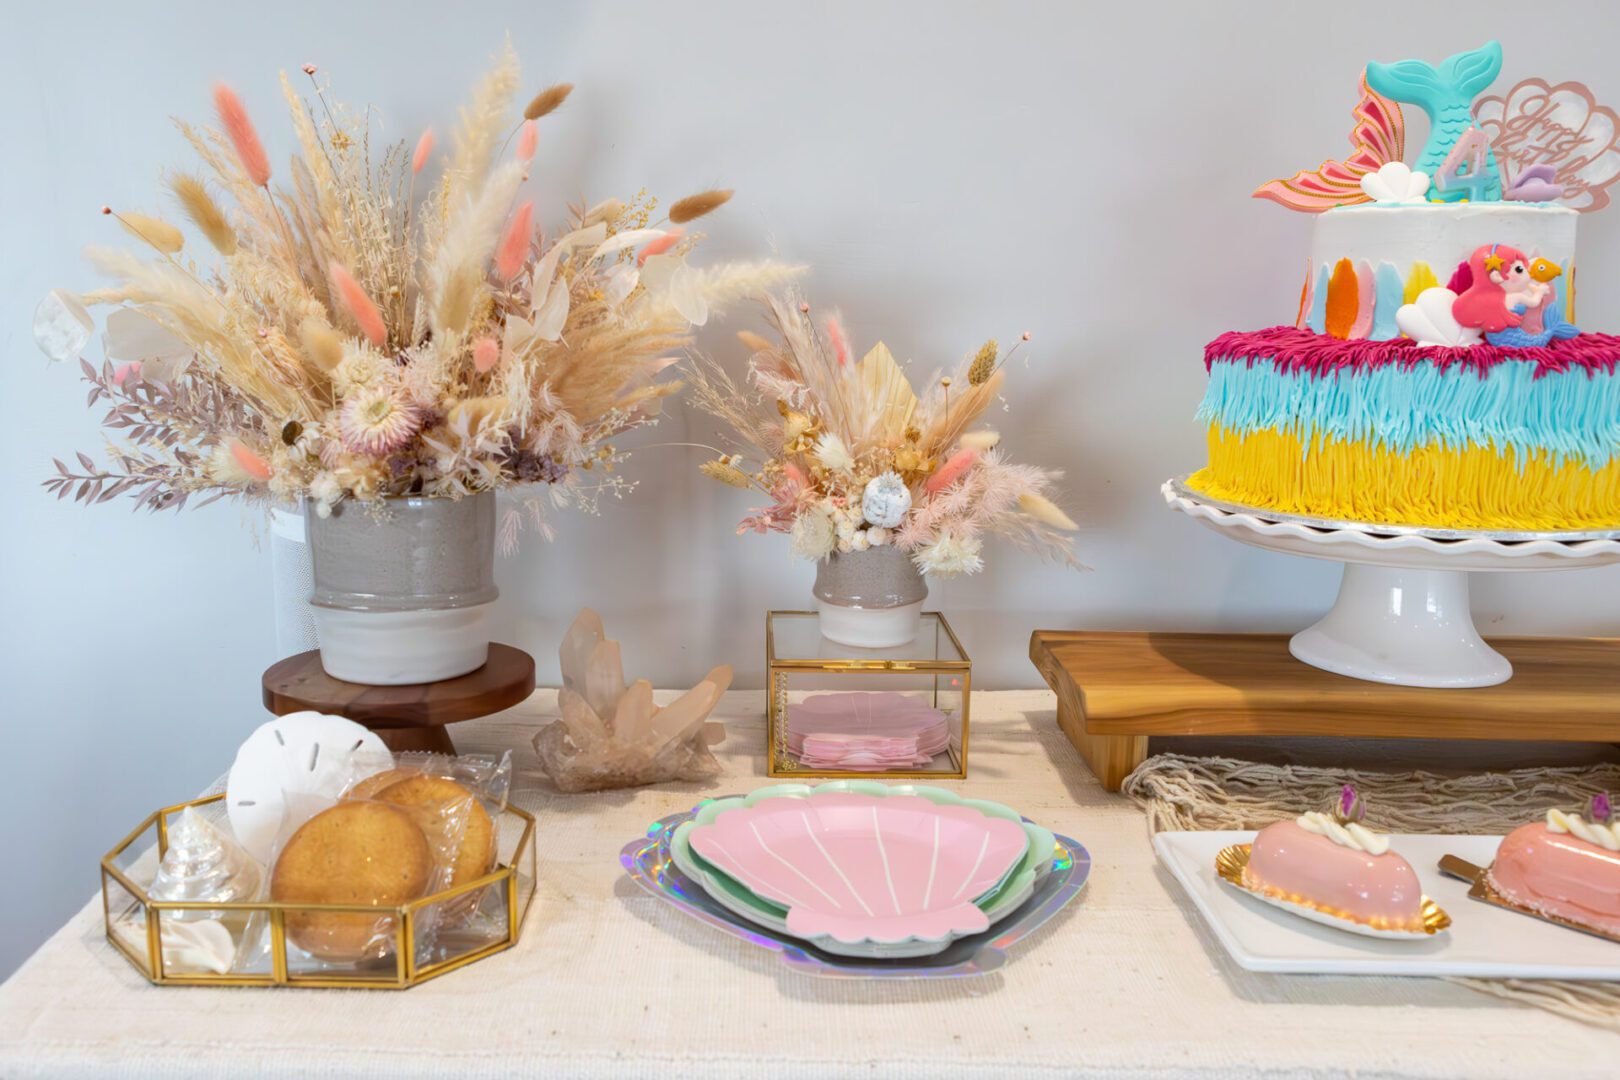 A dessert table with mermaid themed cakes and desserts.